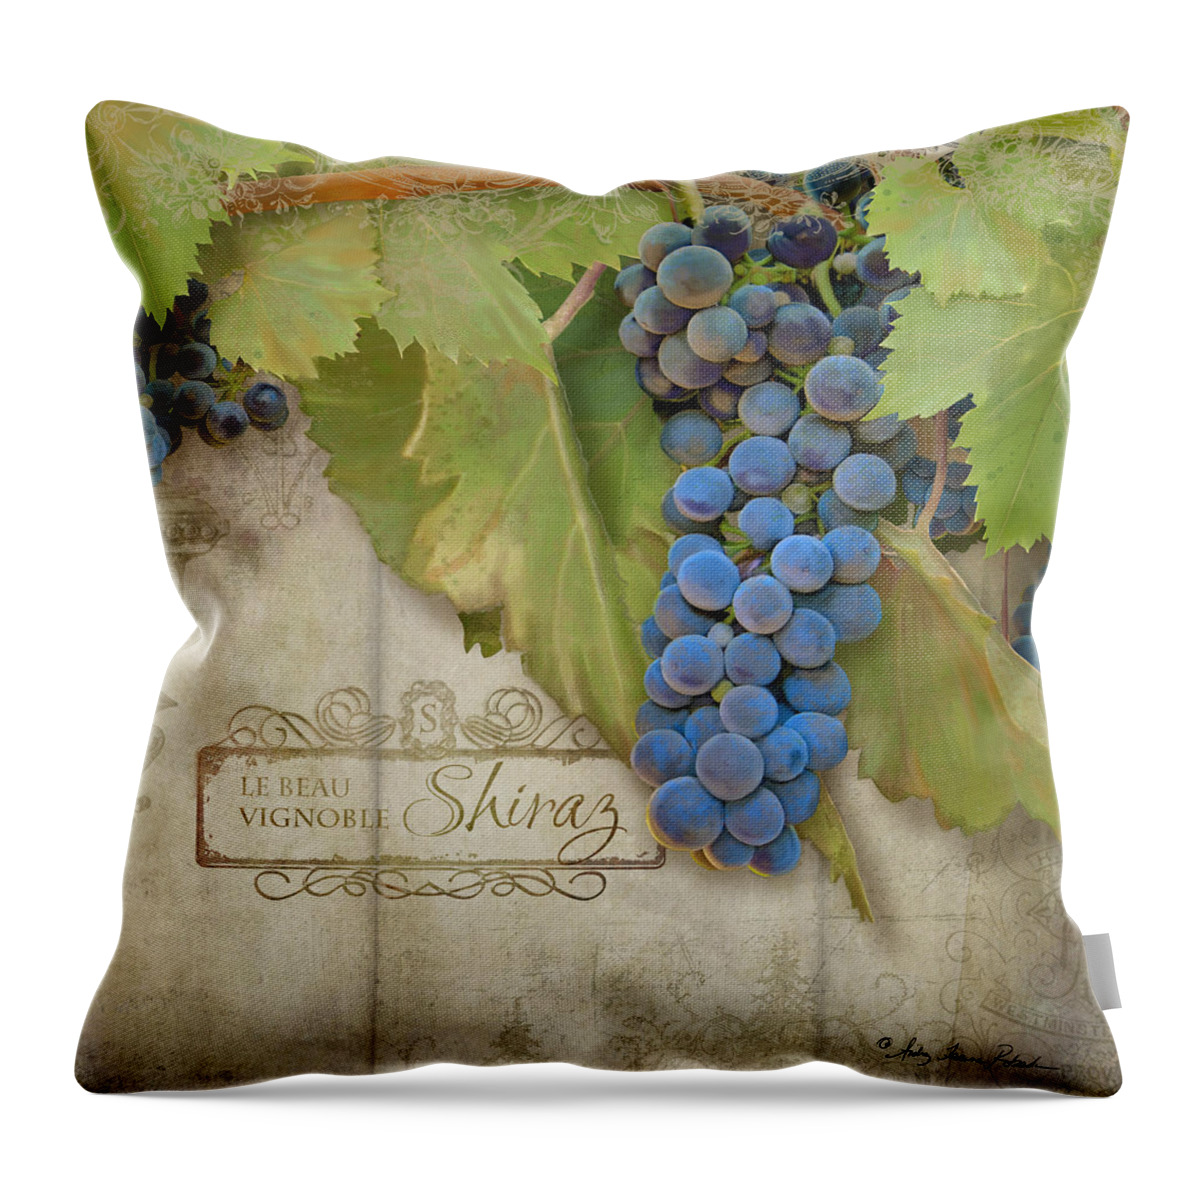 Shiraz Throw Pillow featuring the painting Rustic Vineyard - Shiraz Wine Grapes over Stone by Audrey Jeanne Roberts